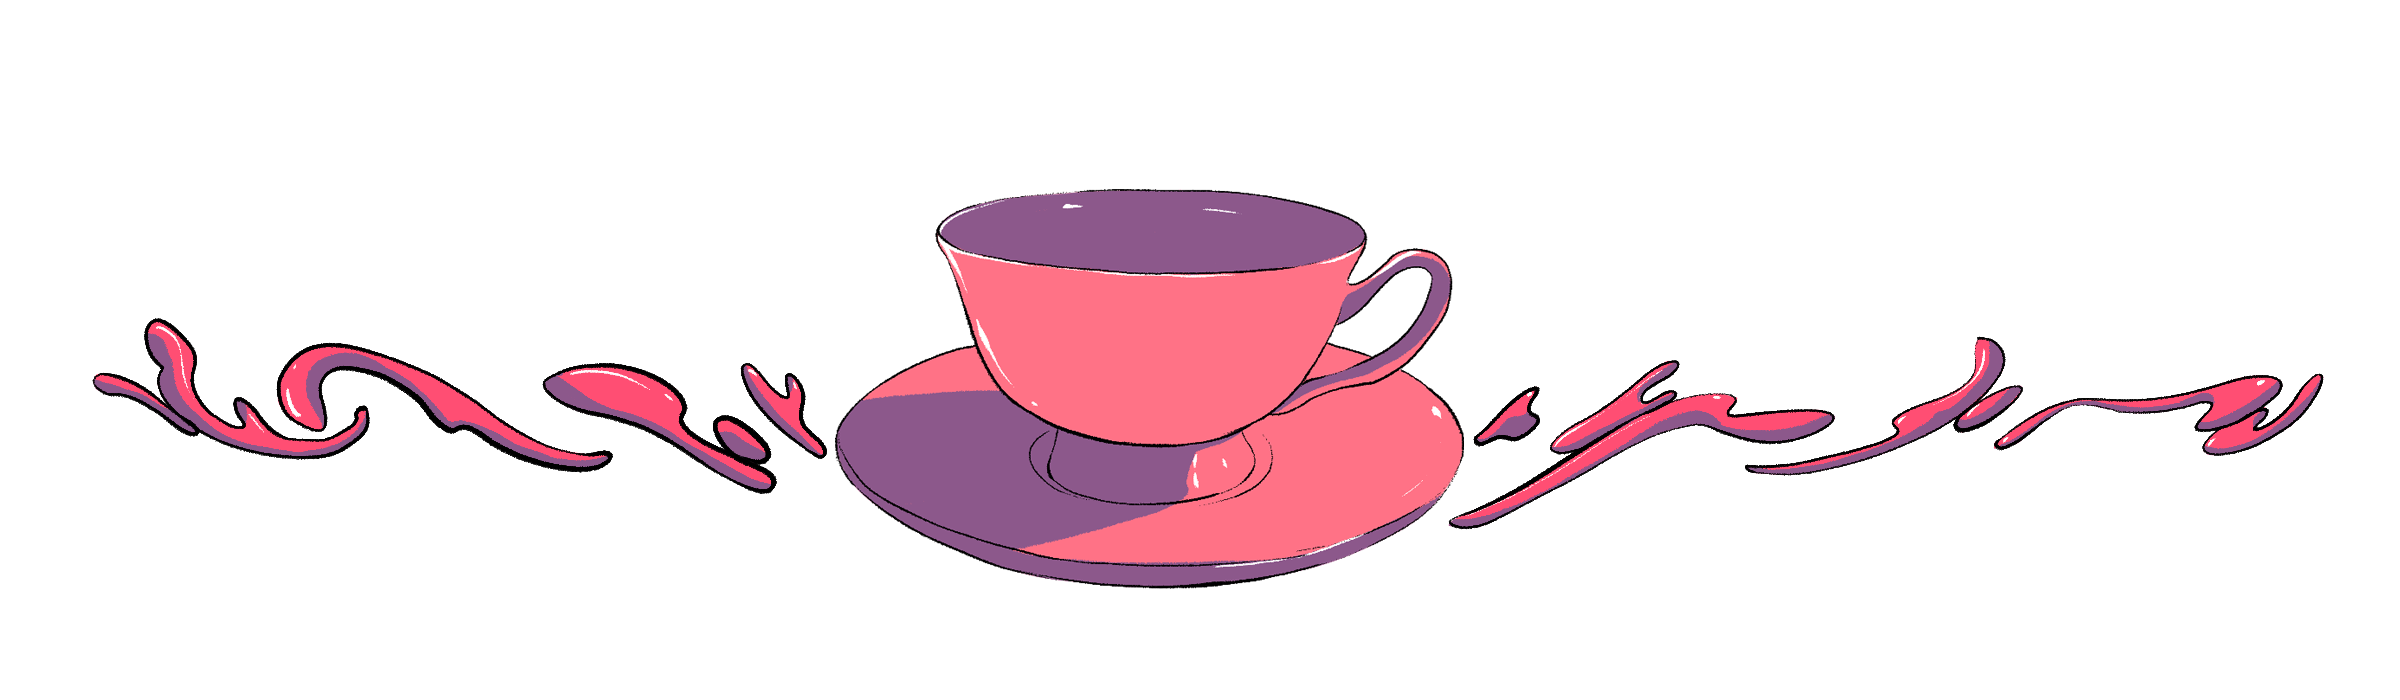 Illustration of pink teacup used to divide story text